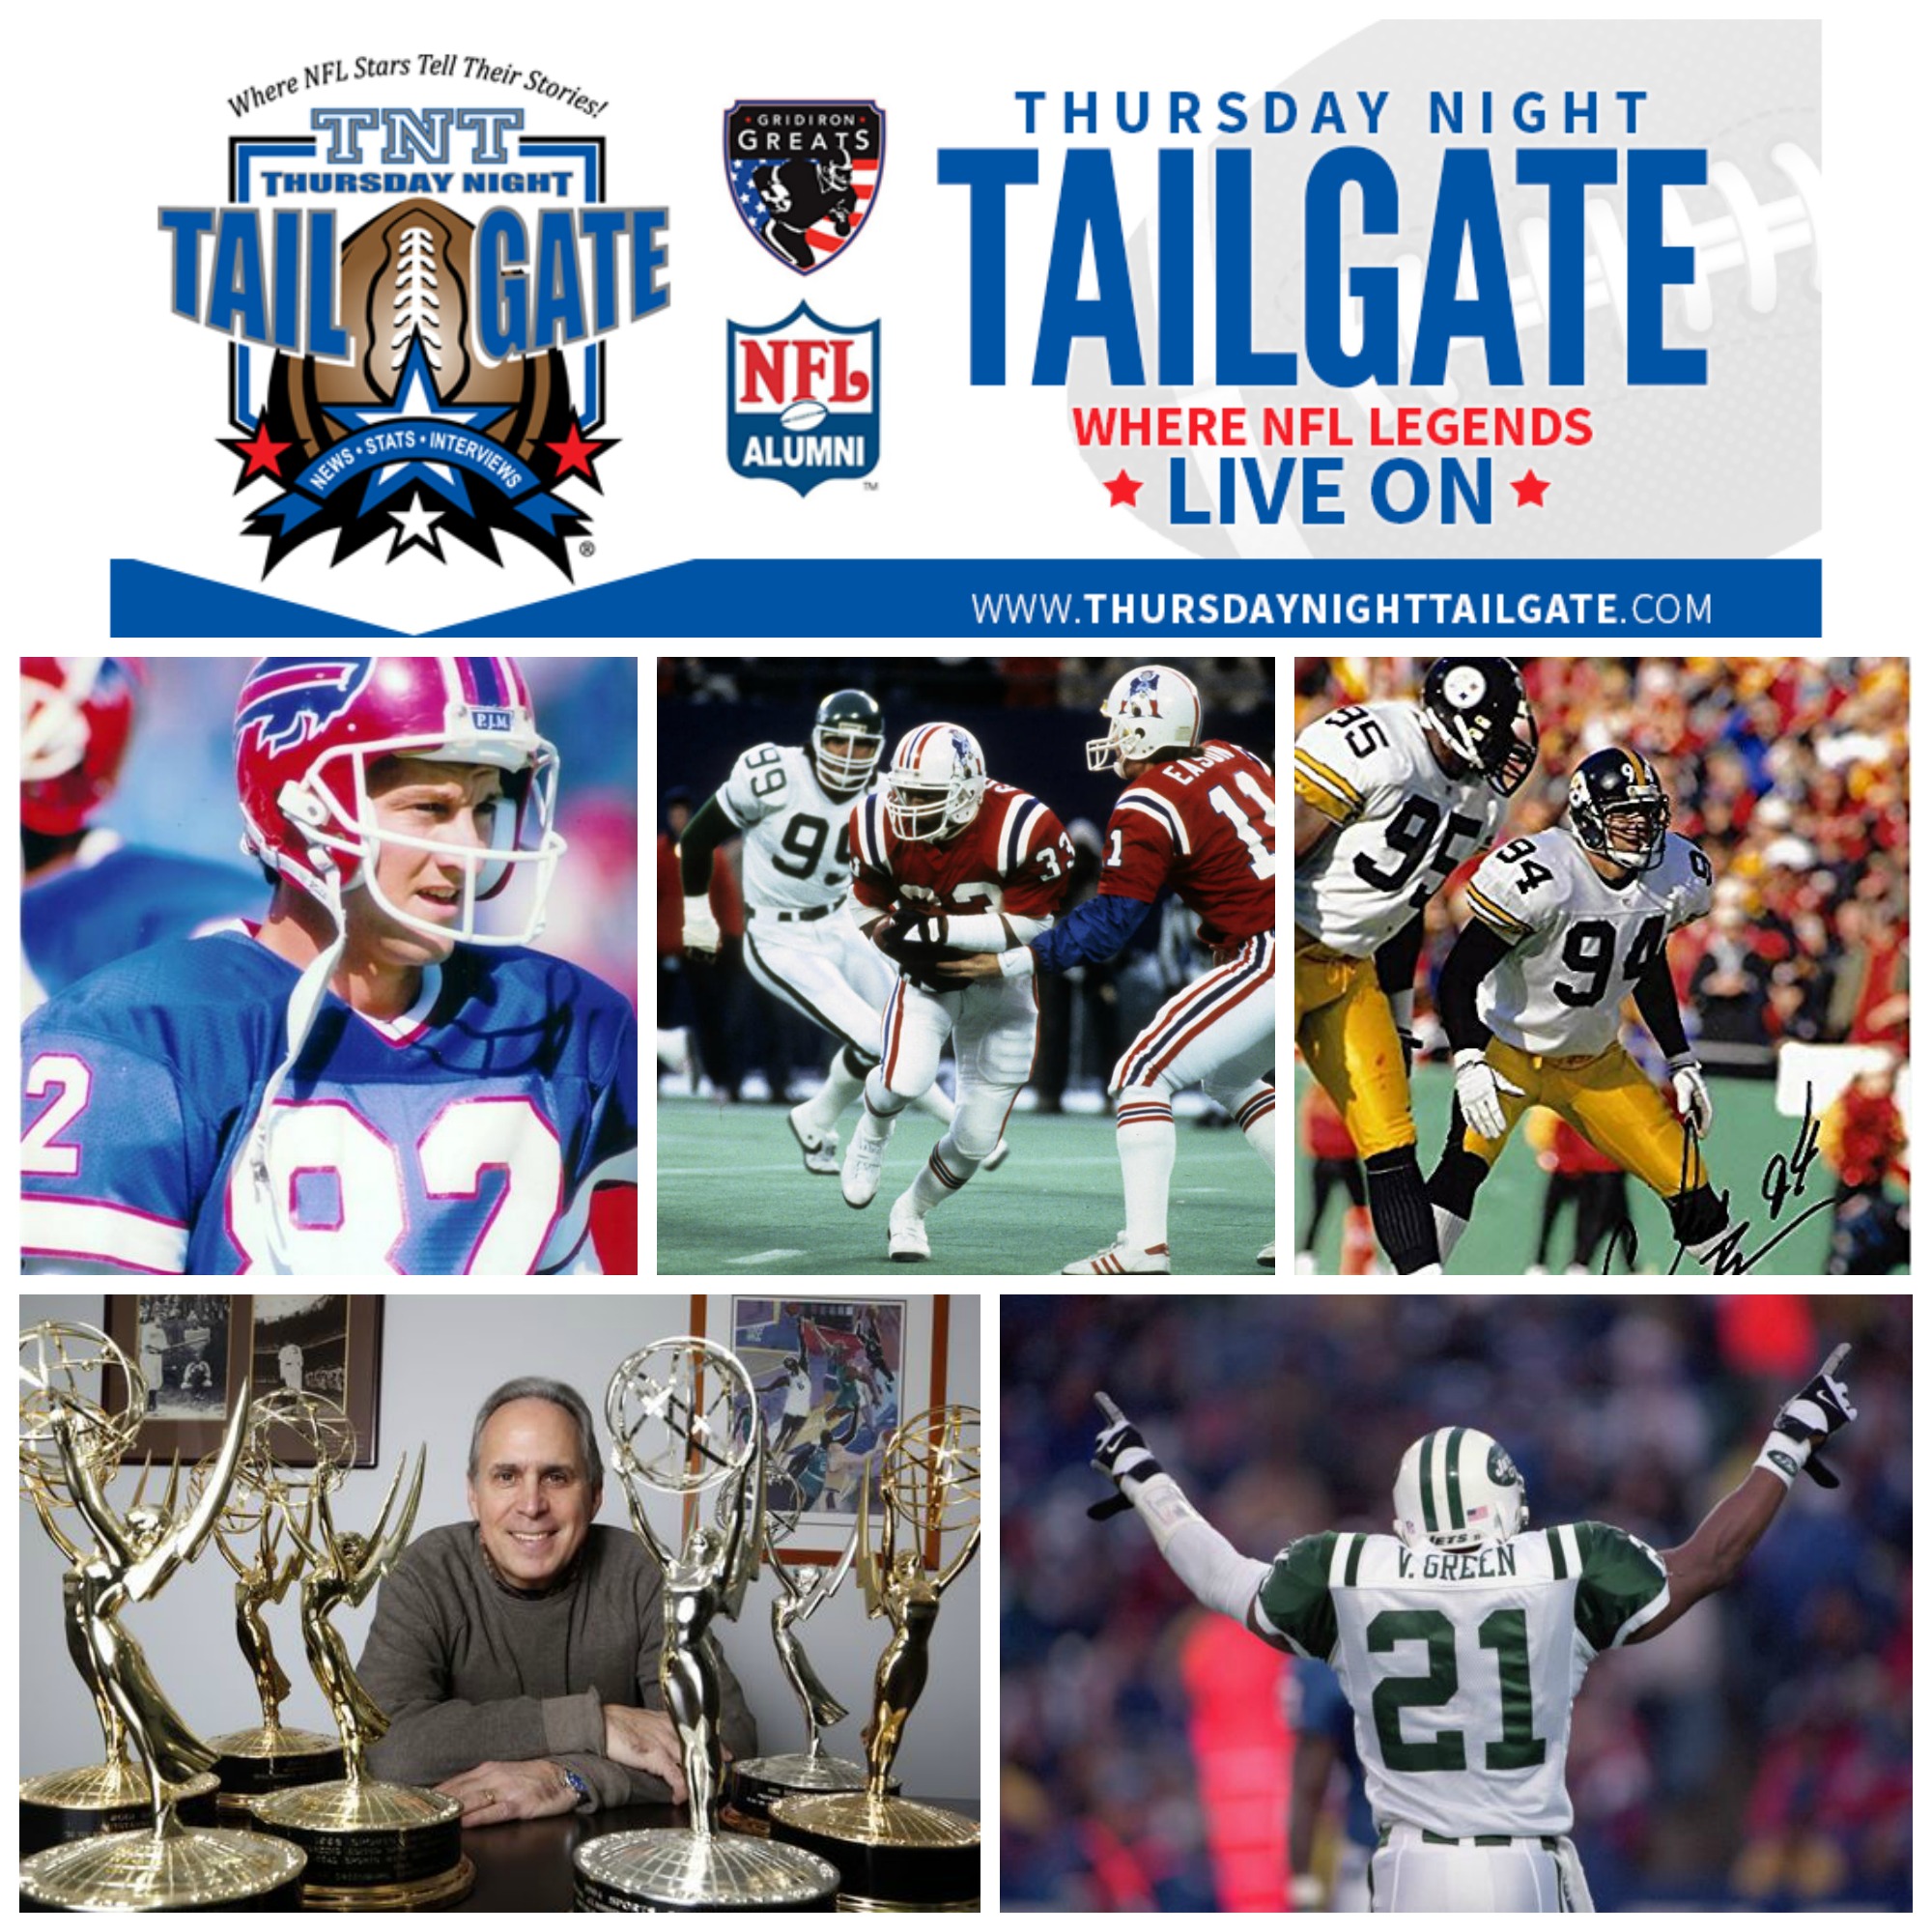 NFL: Don Beebe, Tony Collins, Chad Brown, Ross Greenburg & Victor Green join us on this episode of Thursday Night Tailgate